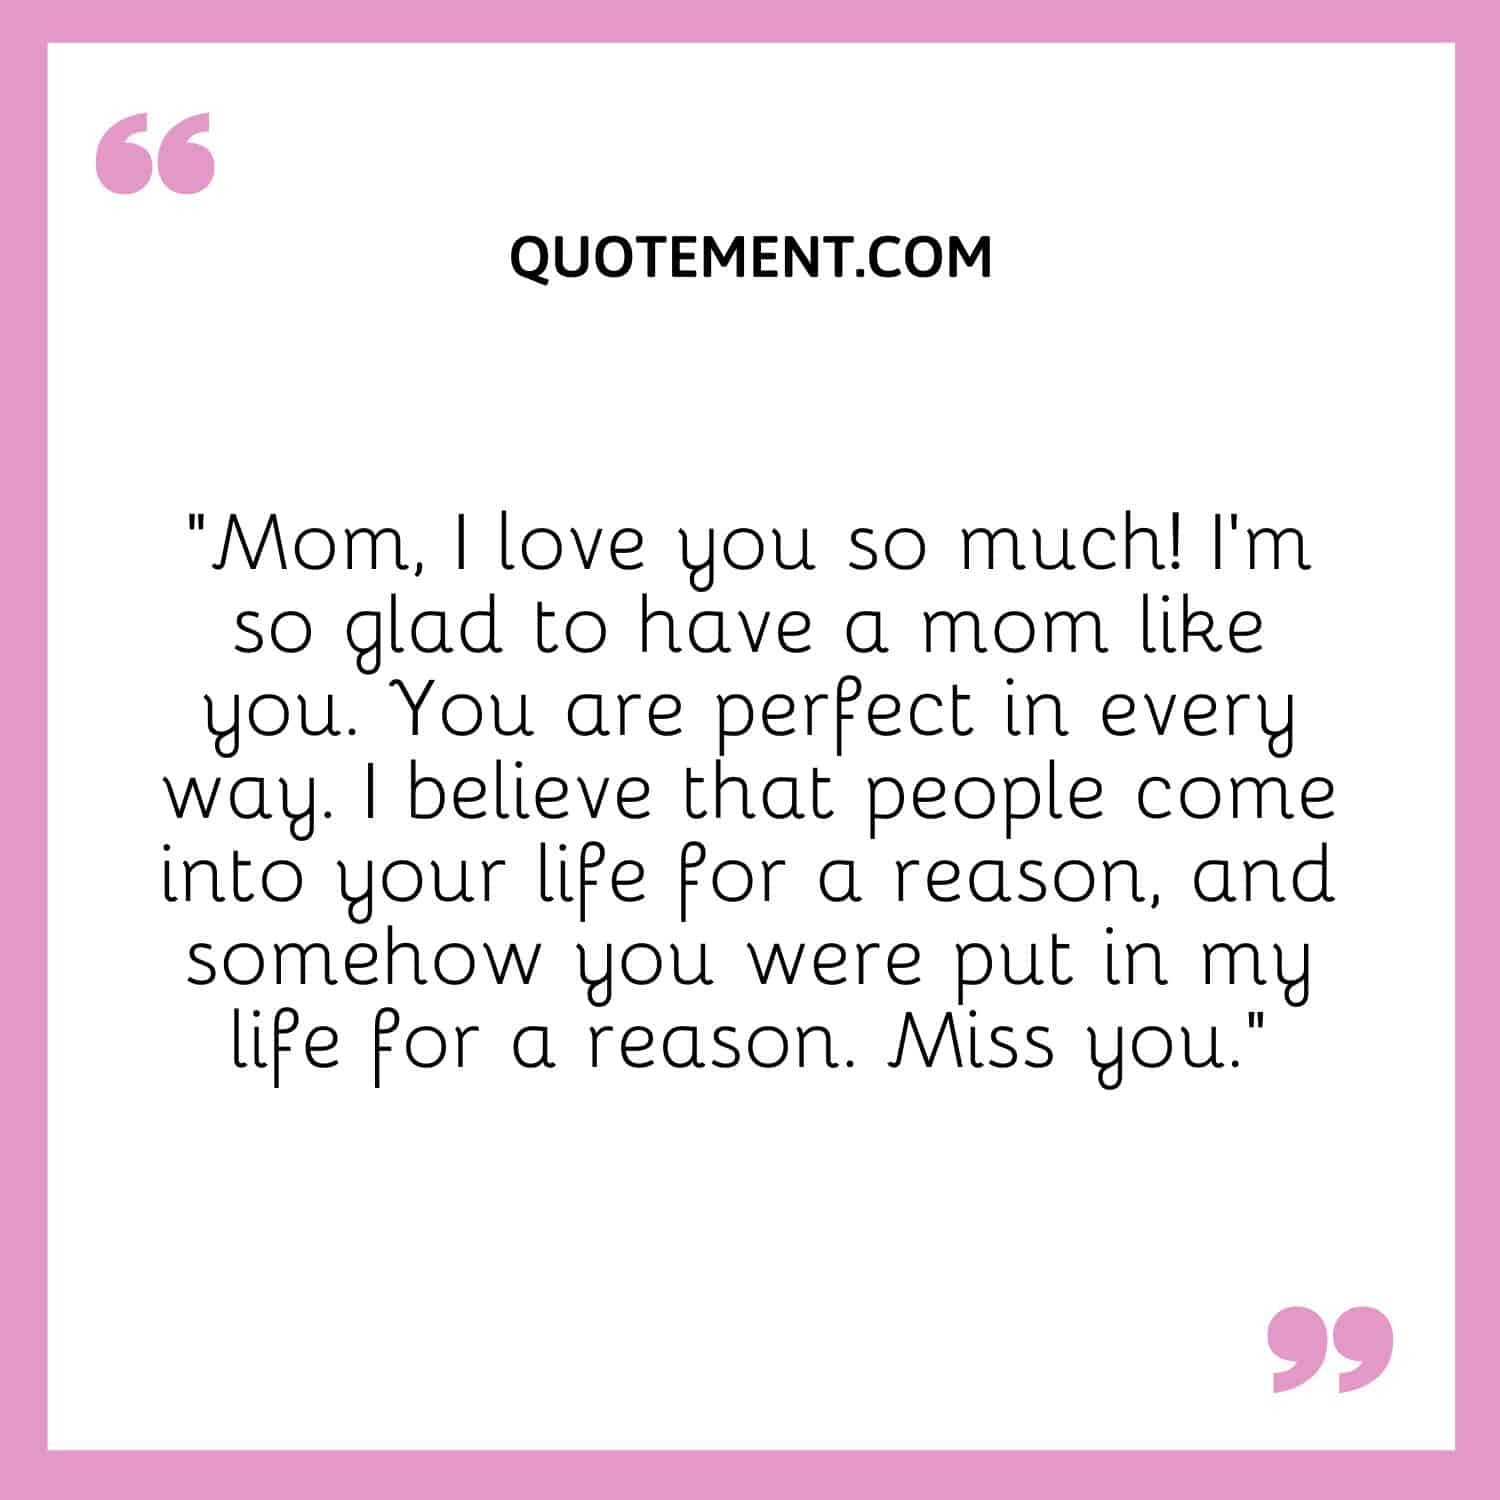 I love you so much! I’m so glad to have a mom like you